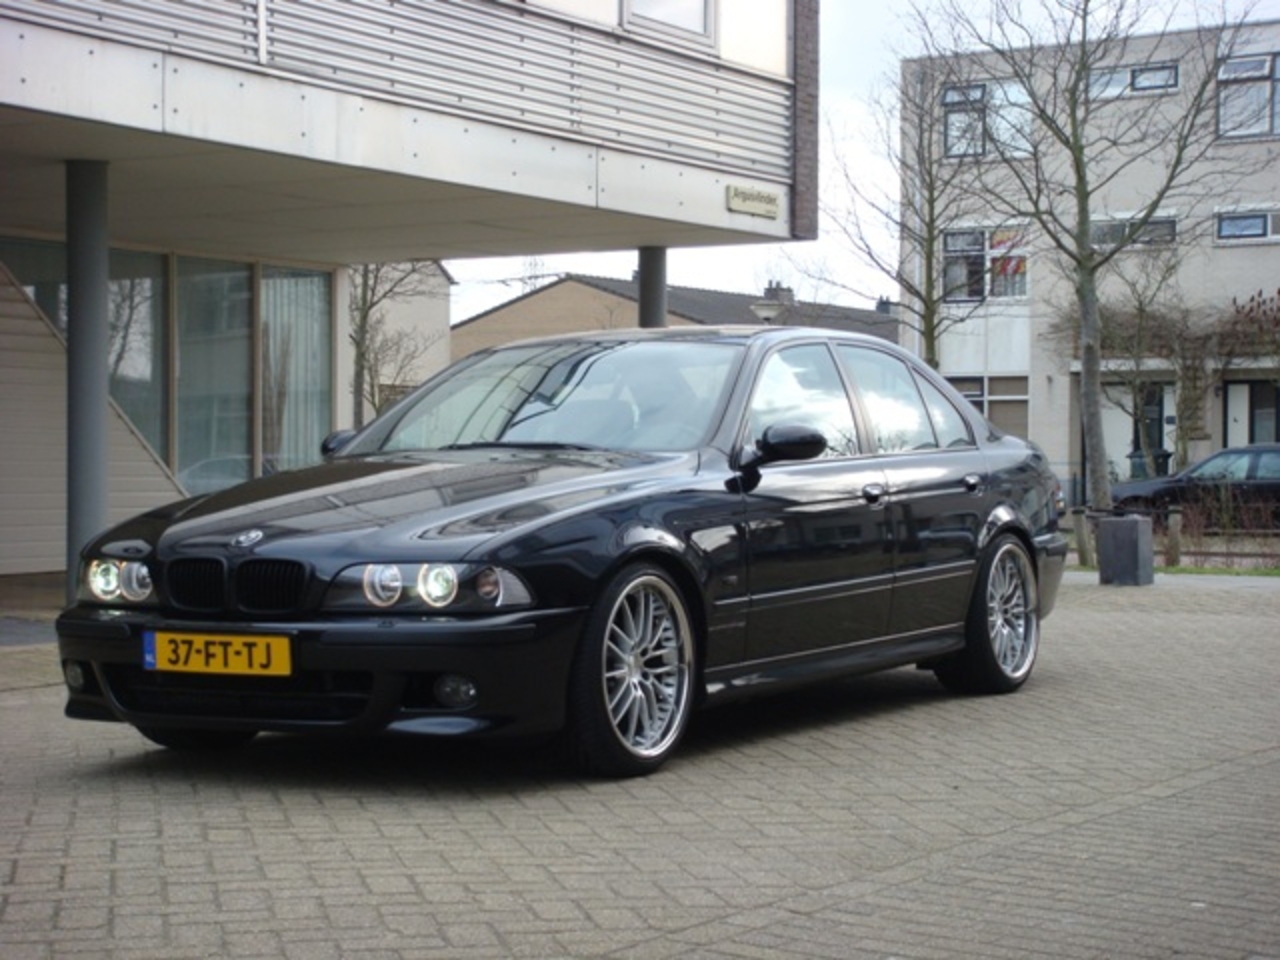 BMW 540i Photo Gallery: Photo #08 out of 11, Image Size - 640 x 480 px